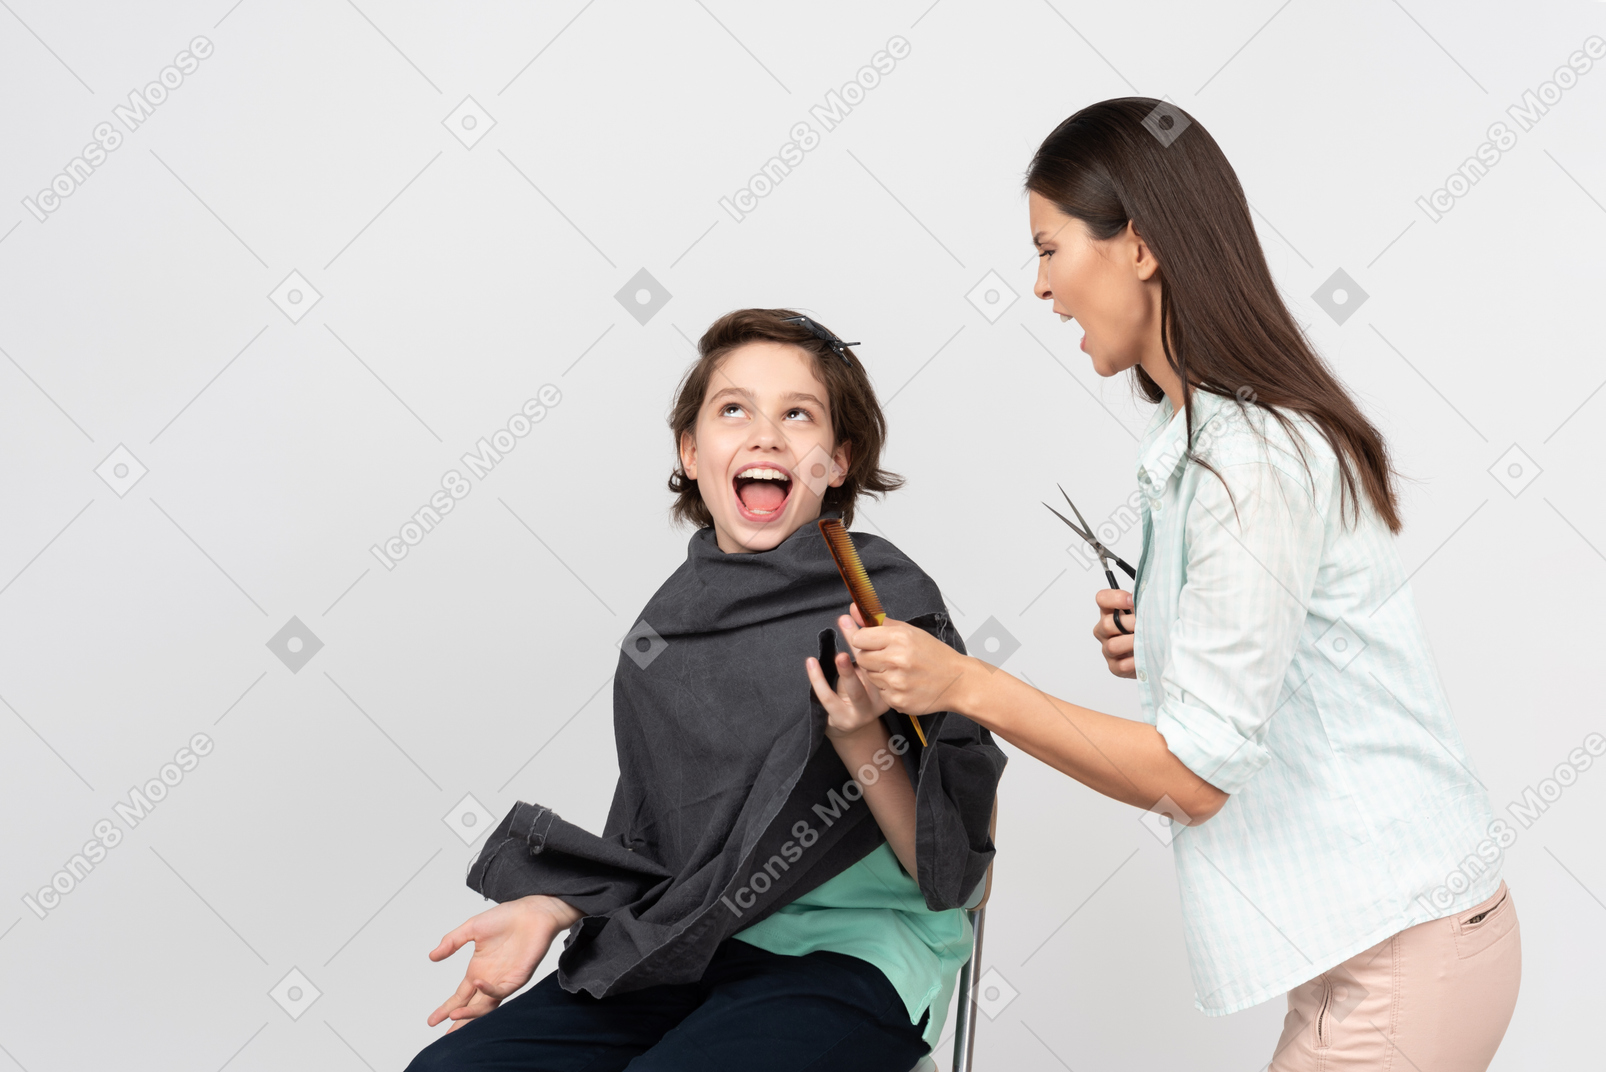 Angry hairdresser shouting at a young customer